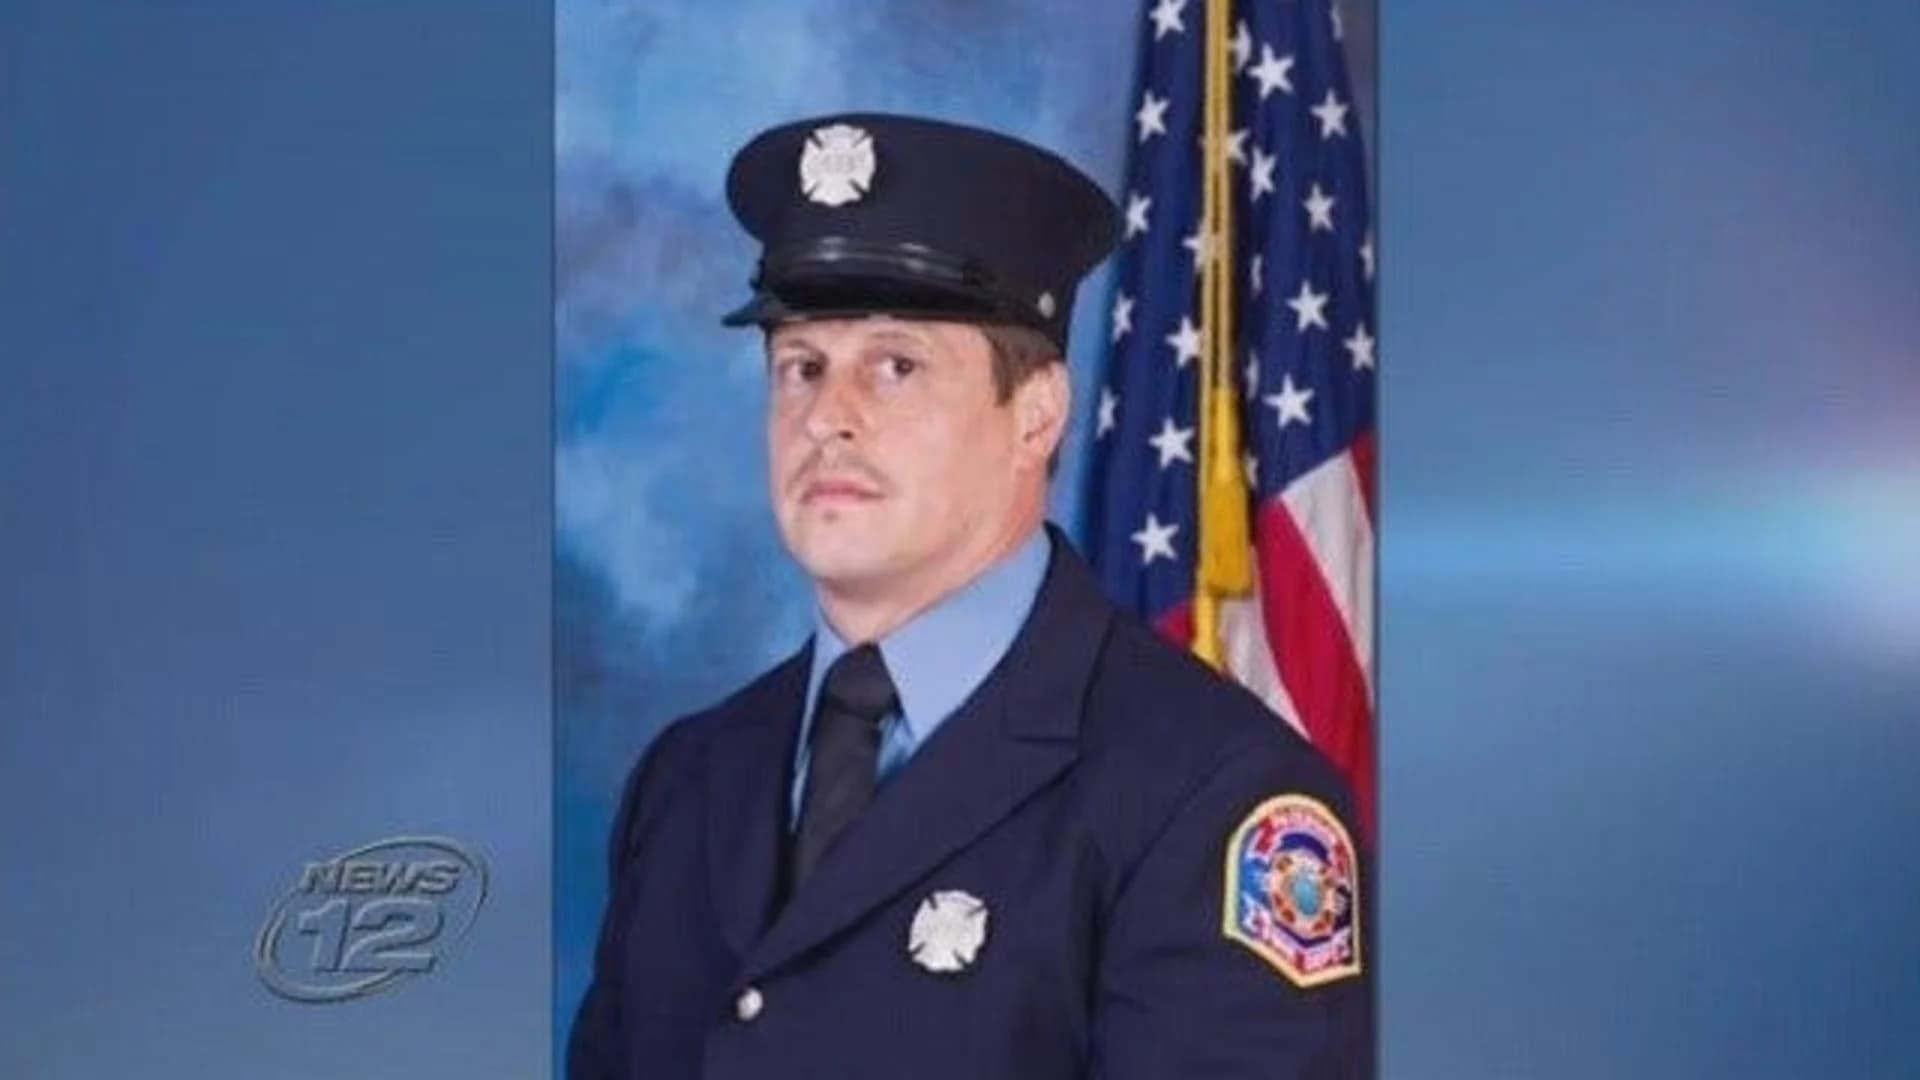 Paterson firefighter ID’d as bicyclist killed in fall